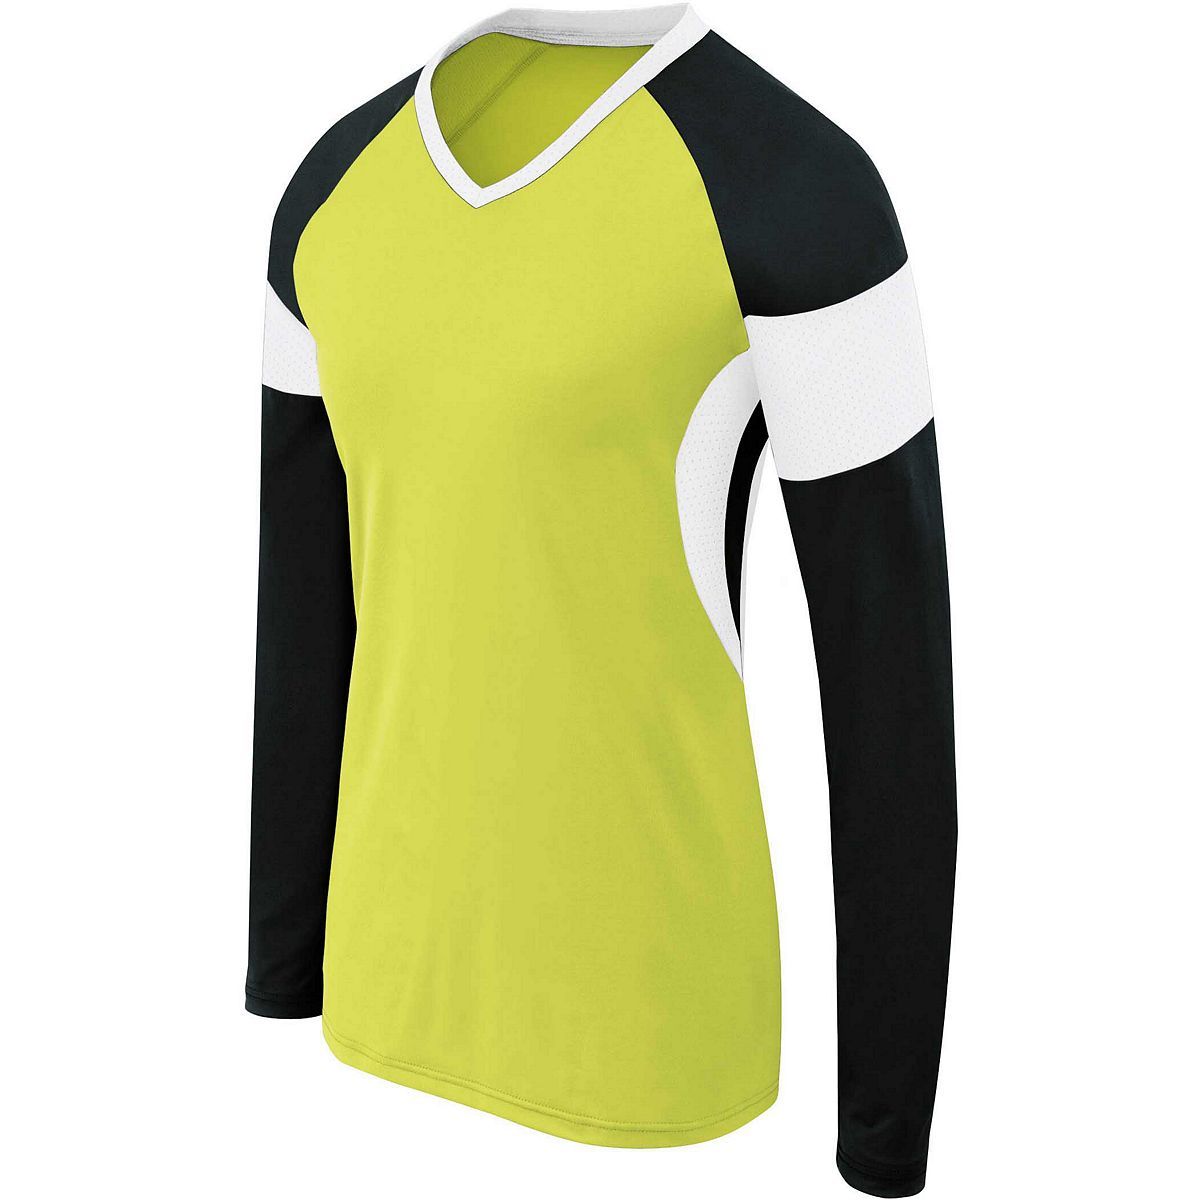 High 5 Ladies Long Sleeve Raptor Jersey in Lime/Black/White  -Part of the Ladies, Ladies-Jersey, High5-Products, Volleyball, Shirts product lines at KanaleyCreations.com